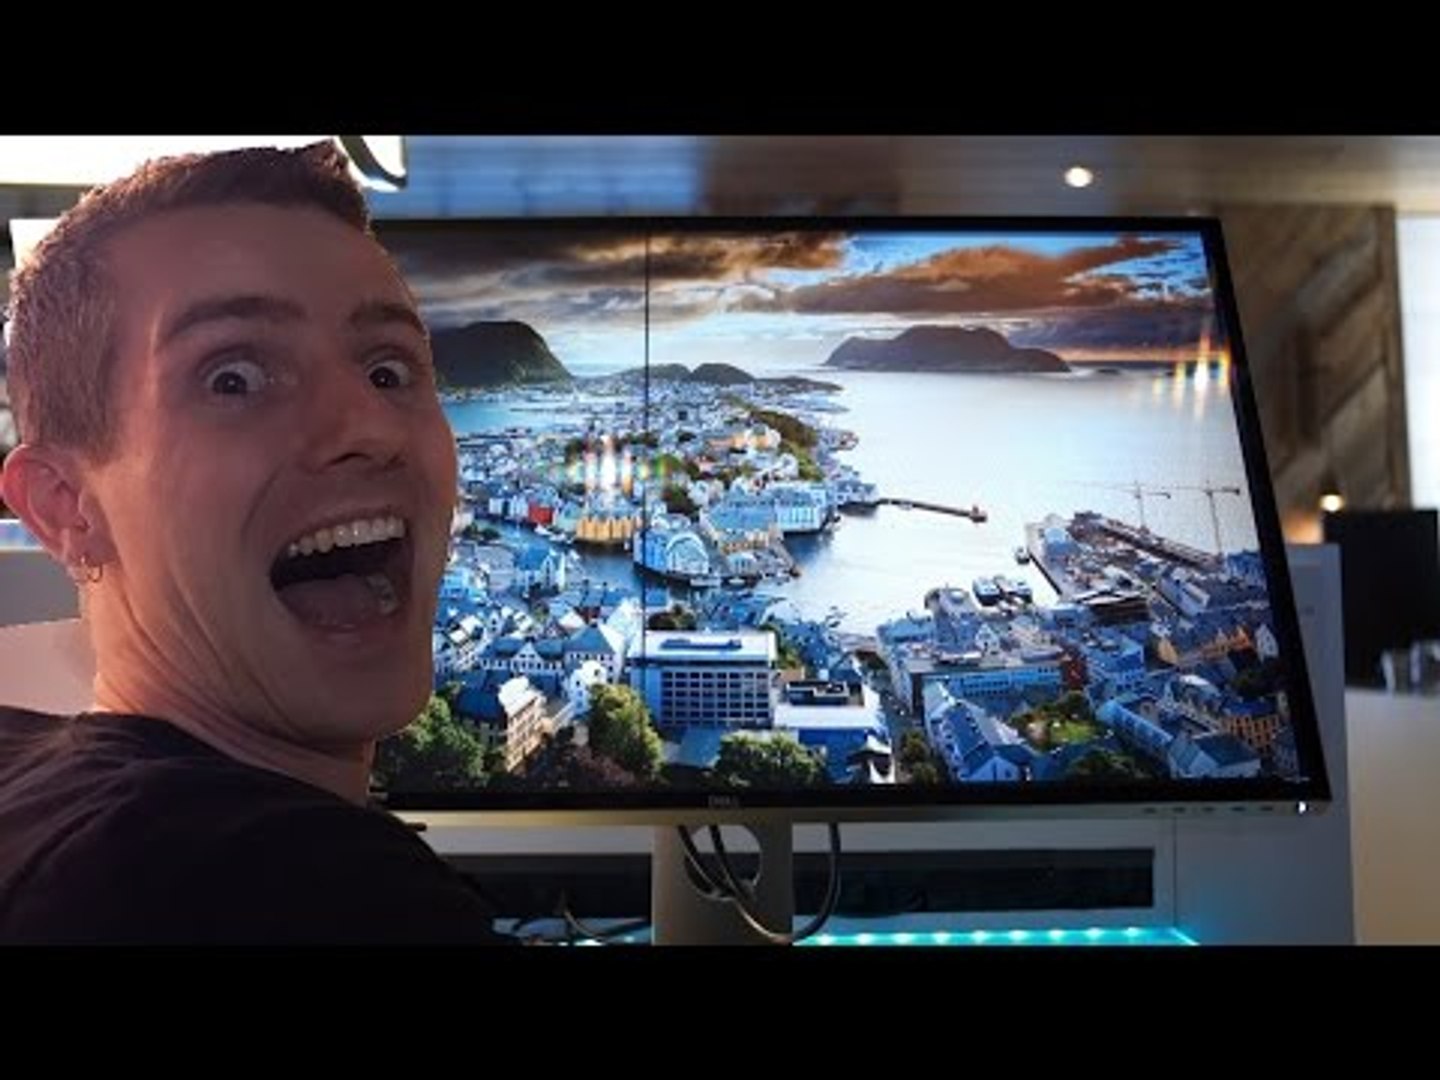 THIS 8K MONITOR IS AMAZING